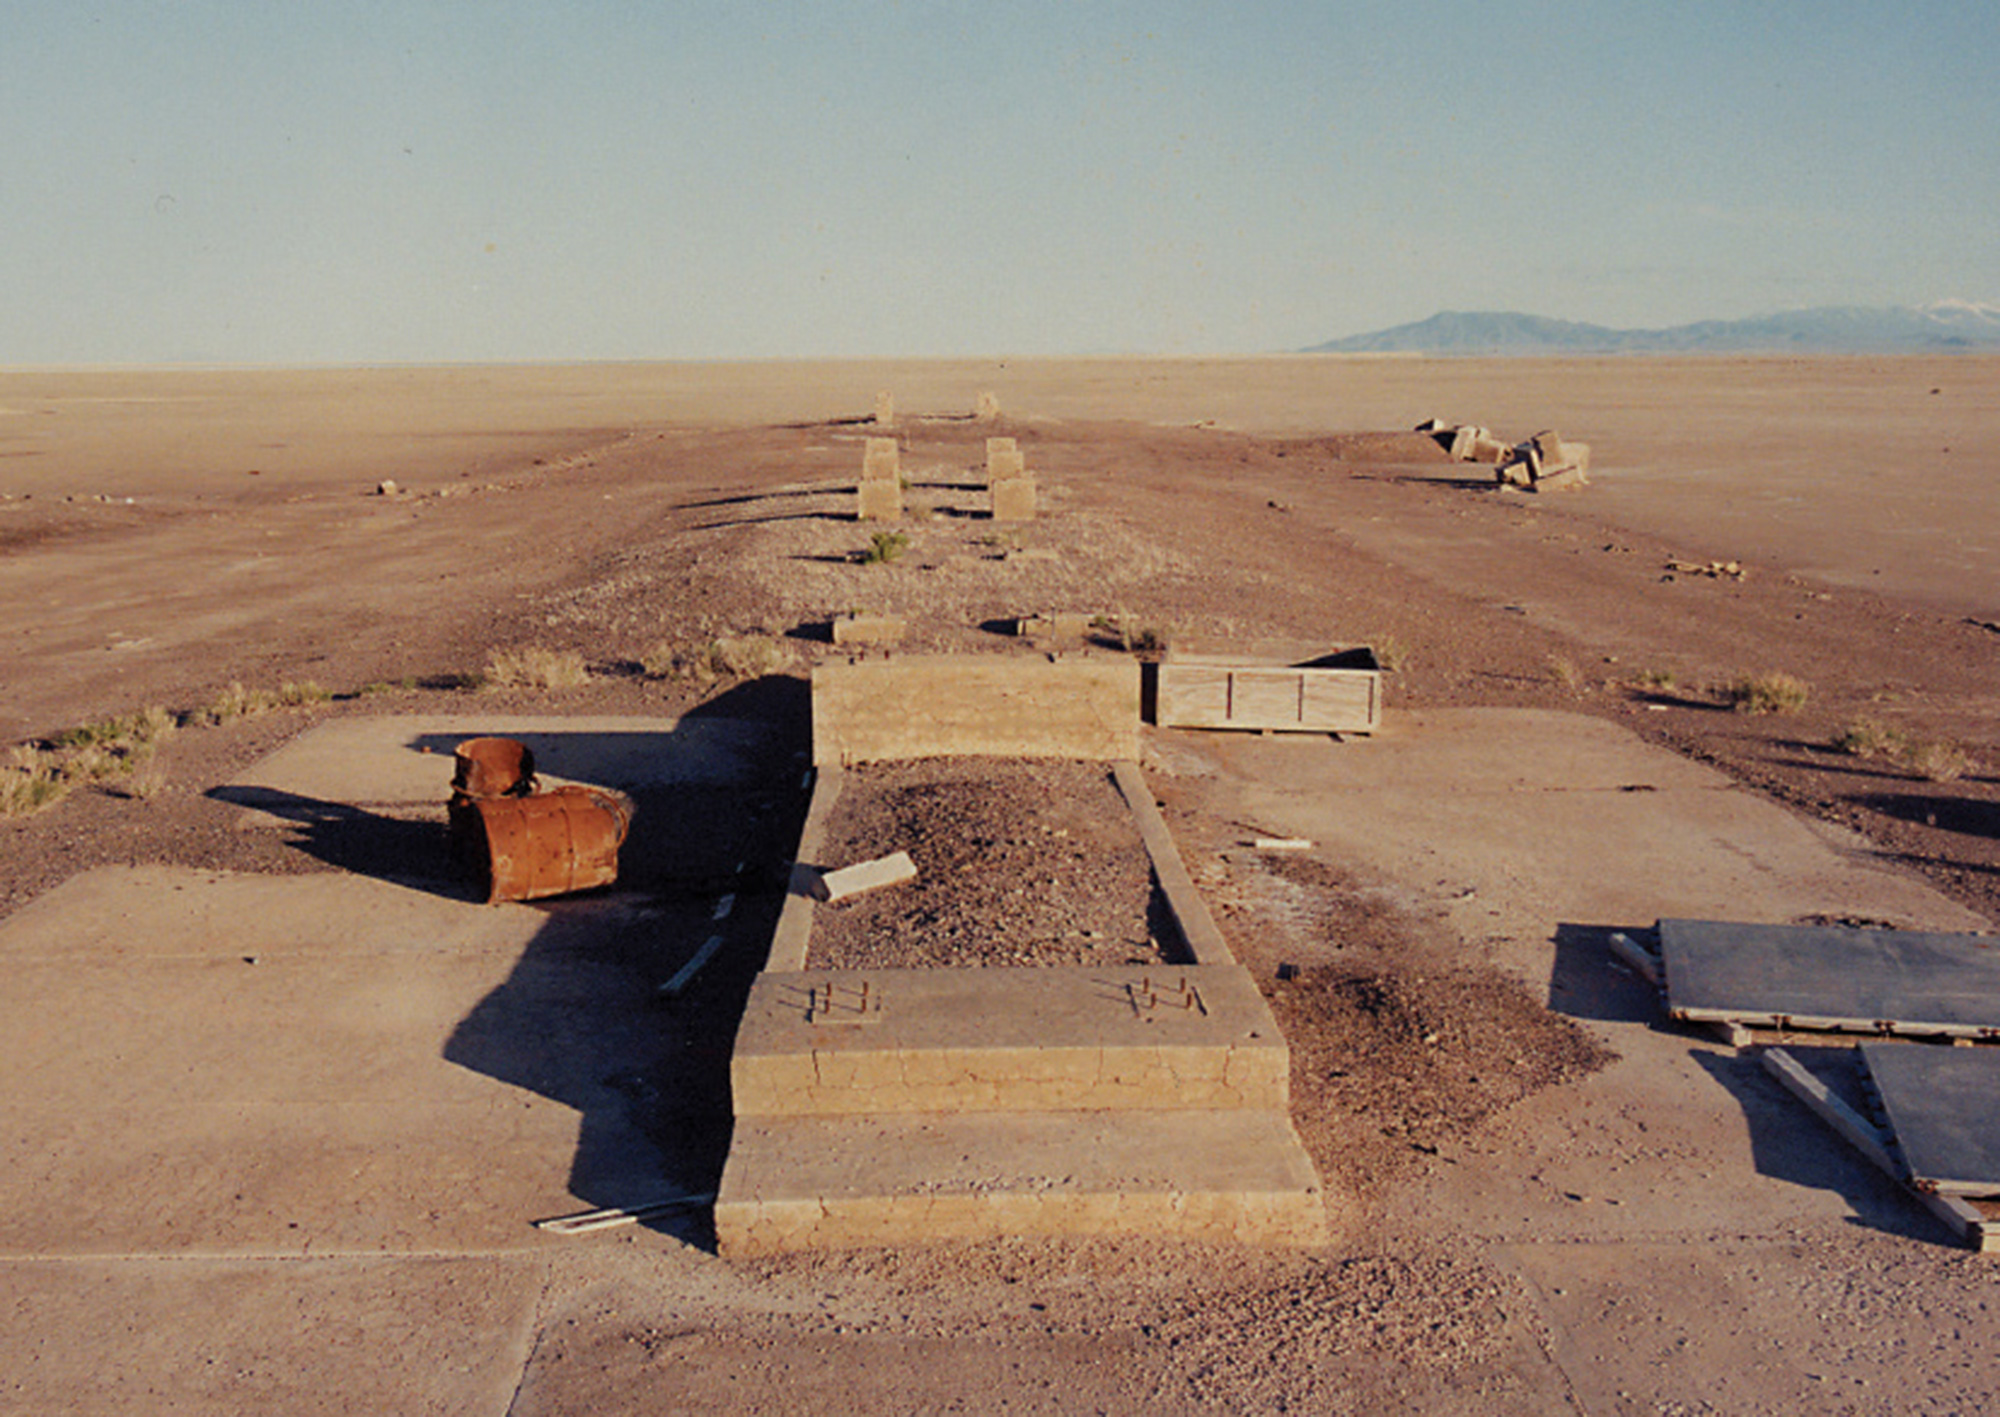 A photograph of a cement launch ramp ruin in the desert.